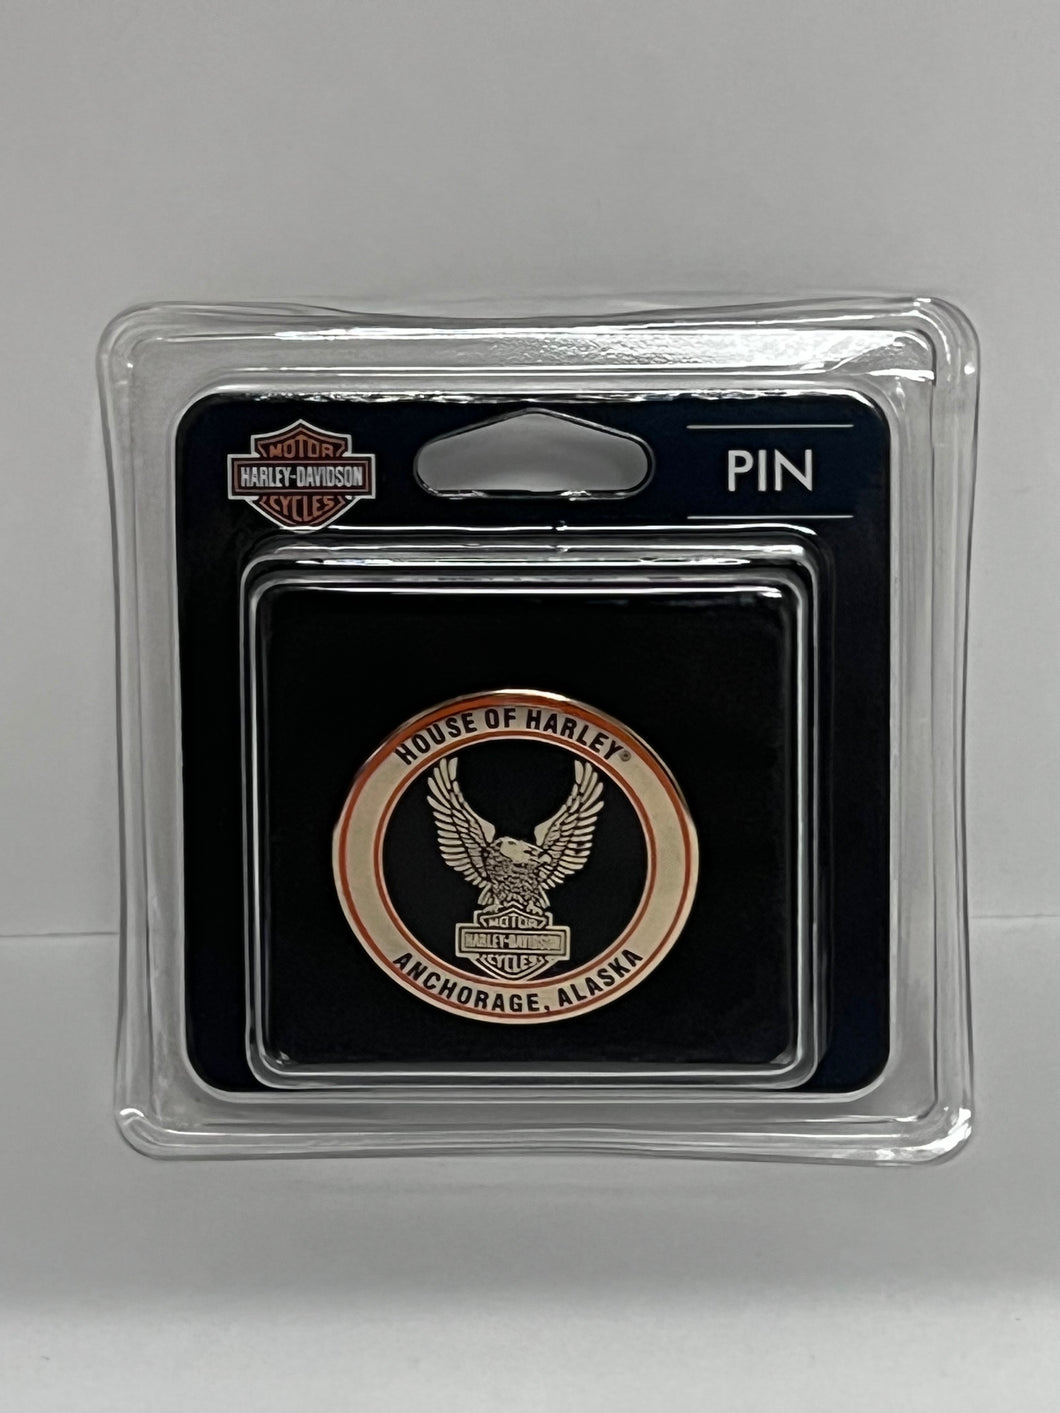 HOUSE OF HARLEY-DAVIIDSON COLLECTORS PIN